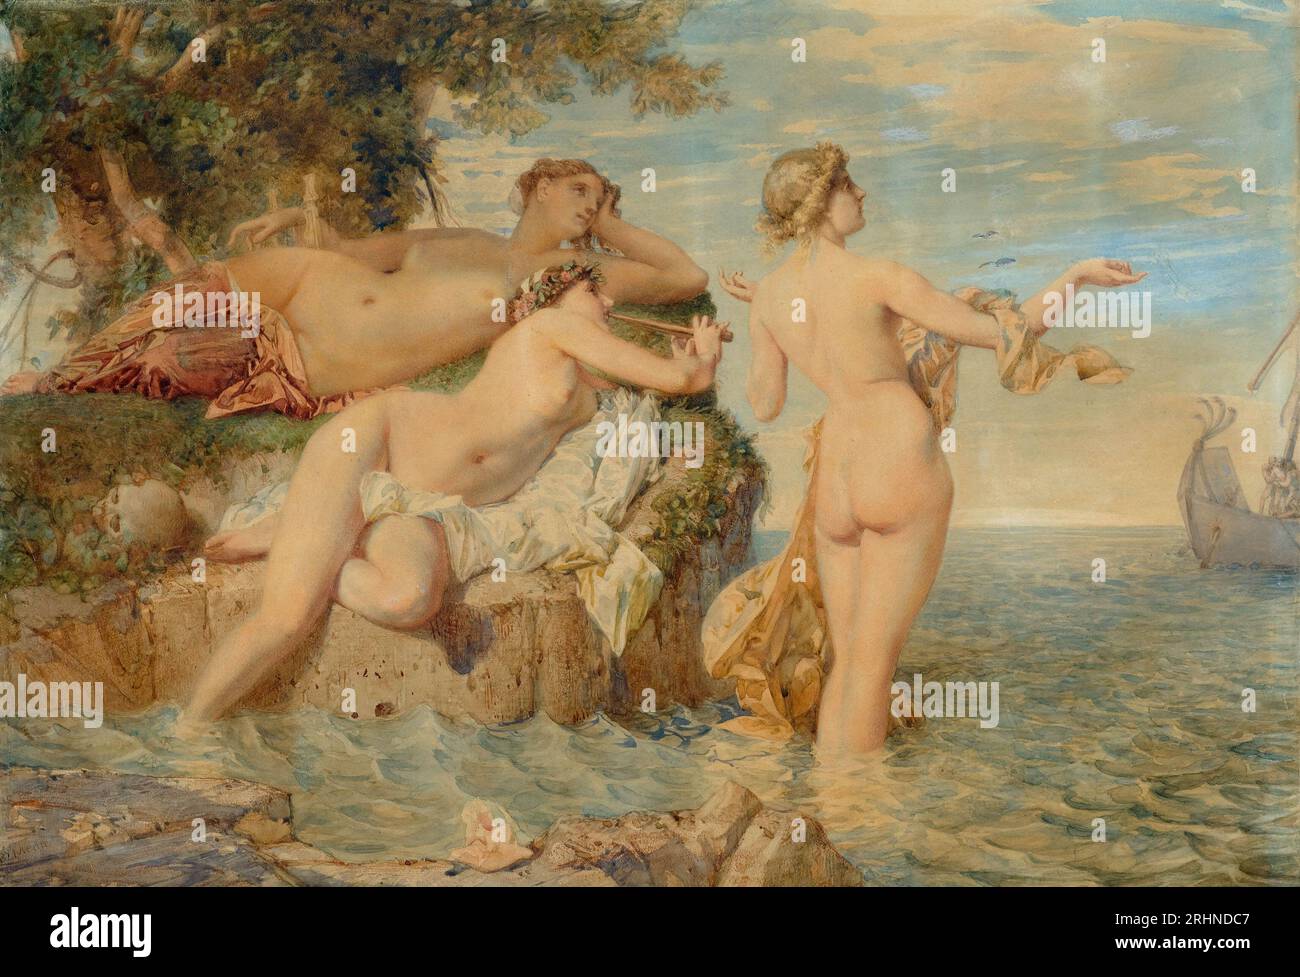 Ulysses and the Sirens. Museum: PRIVATE COLLECTION. Author: Barthélemy Menn. Stock Photo